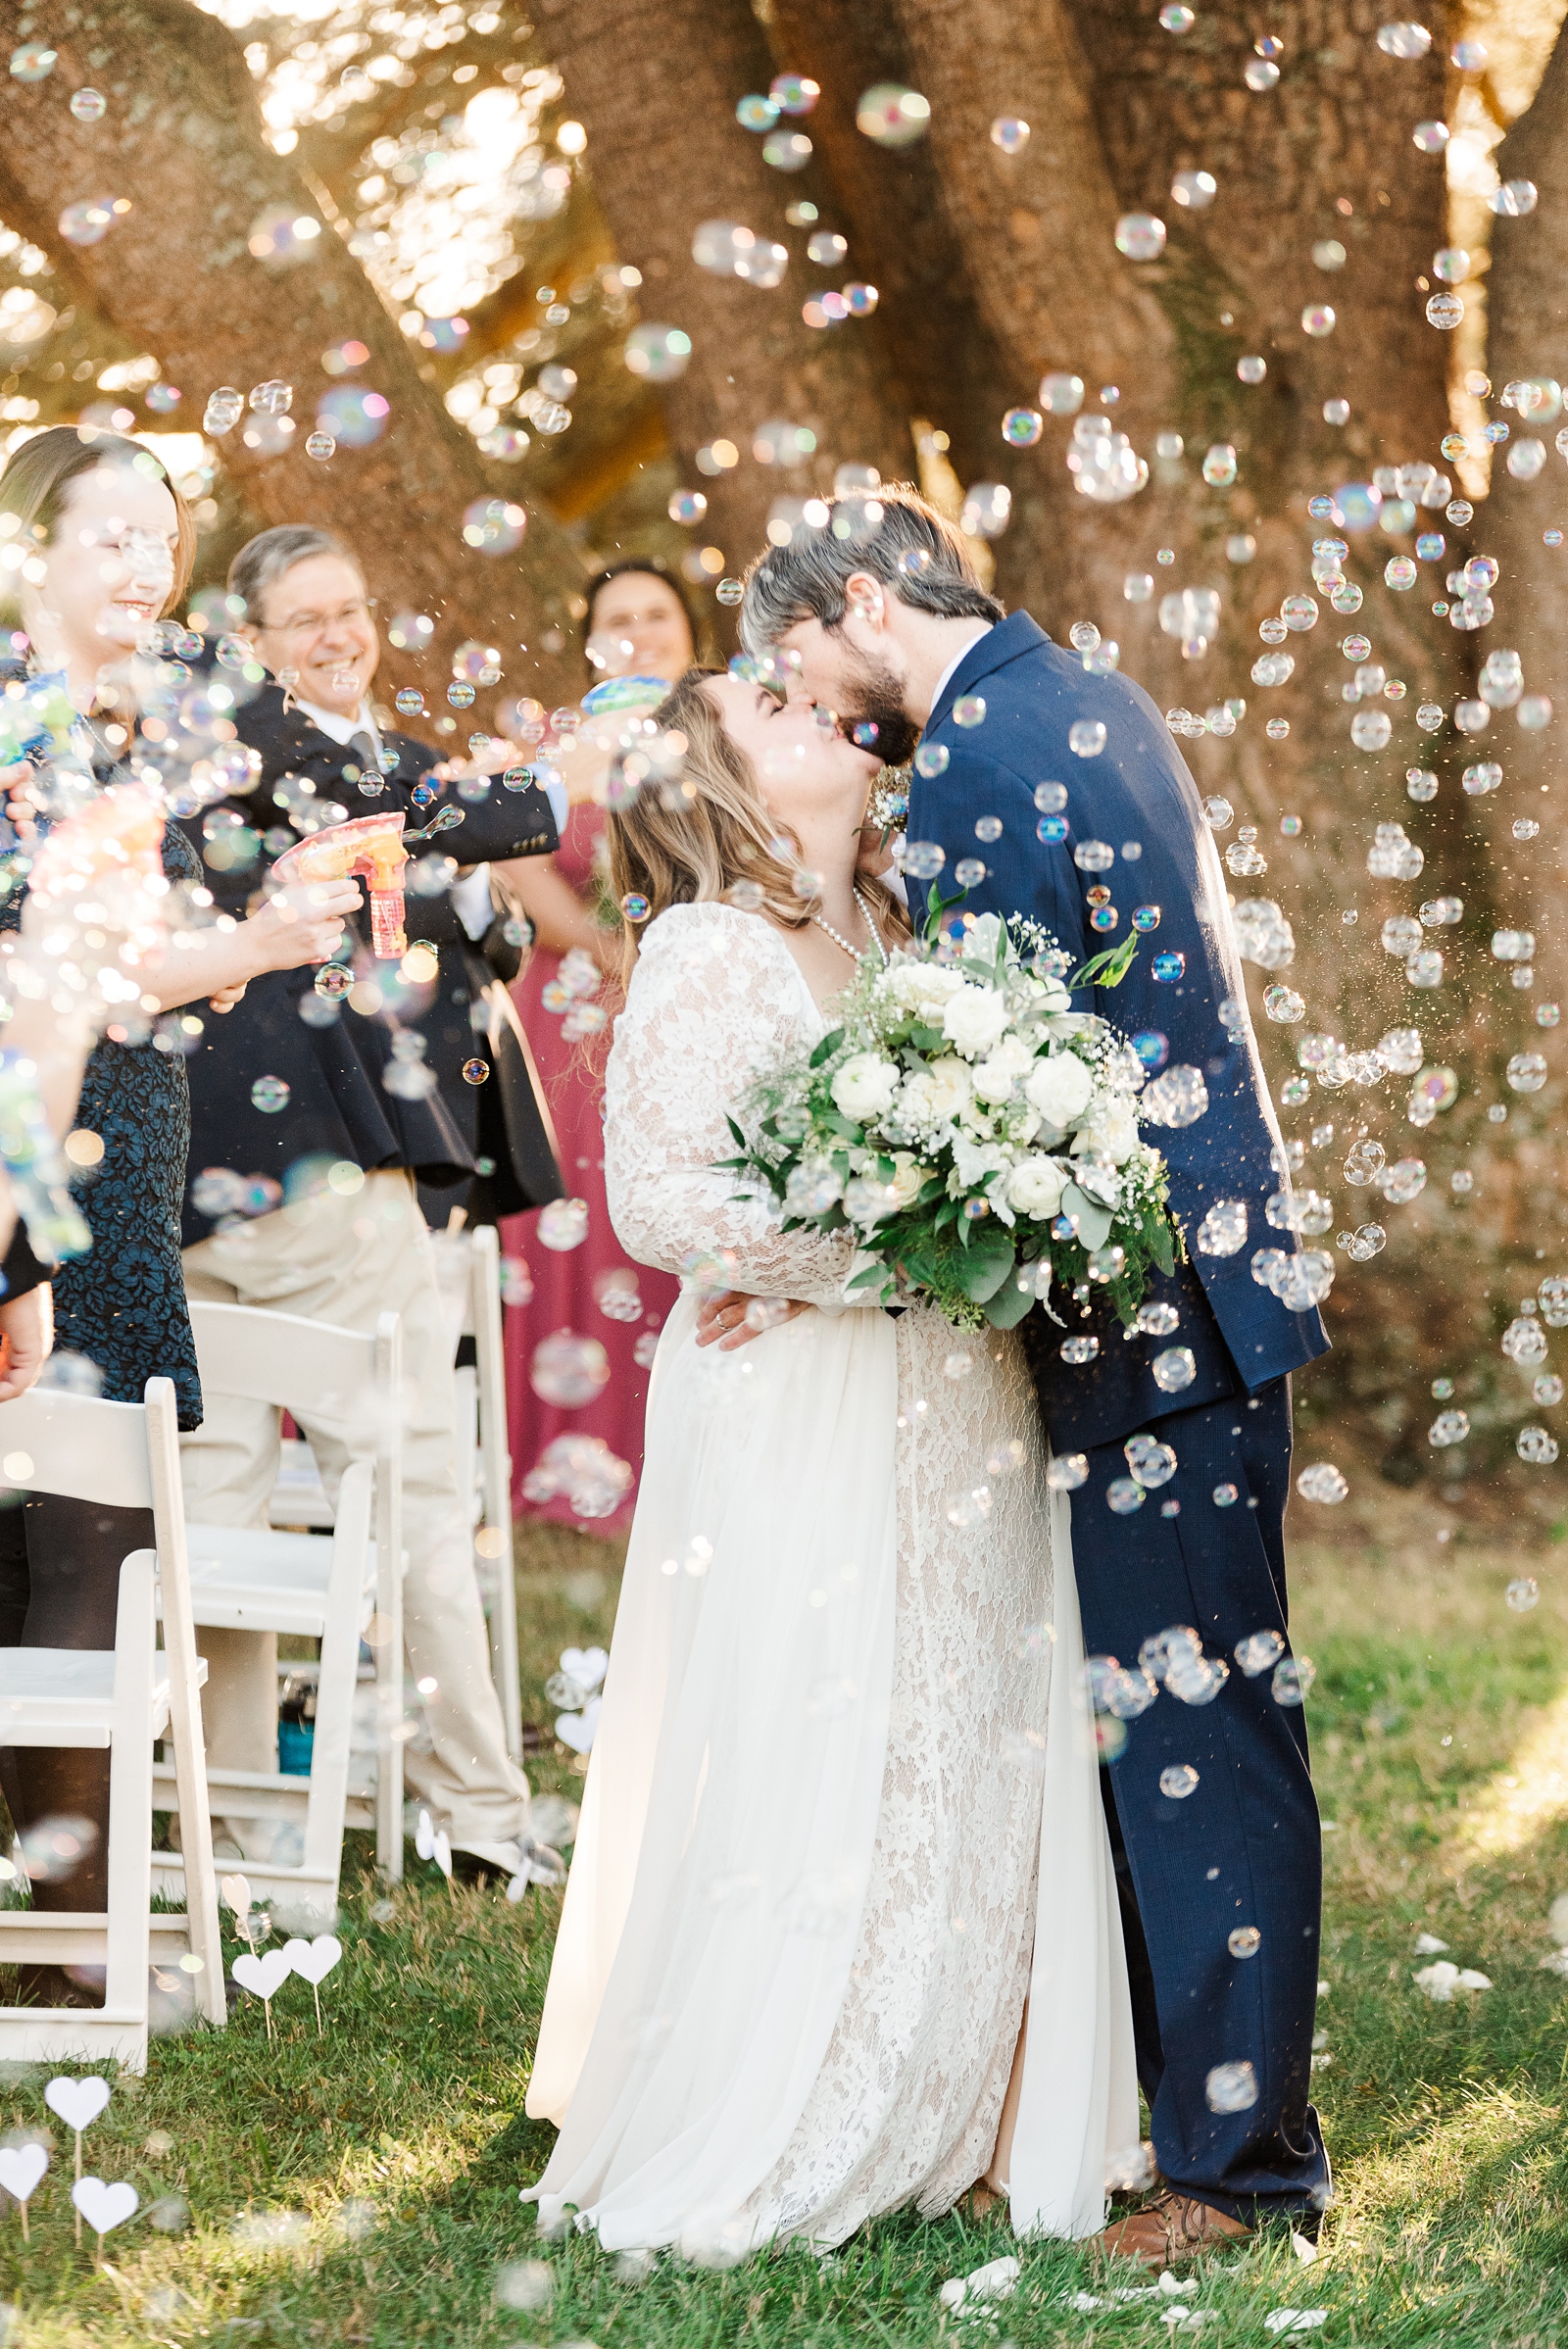 Ceremony Bubble Exit under Blue Cedar Atlas Tree at Fall Maymont Wedding. Photography by Virginia Wedding Photographer Kailey Brianne Photography.